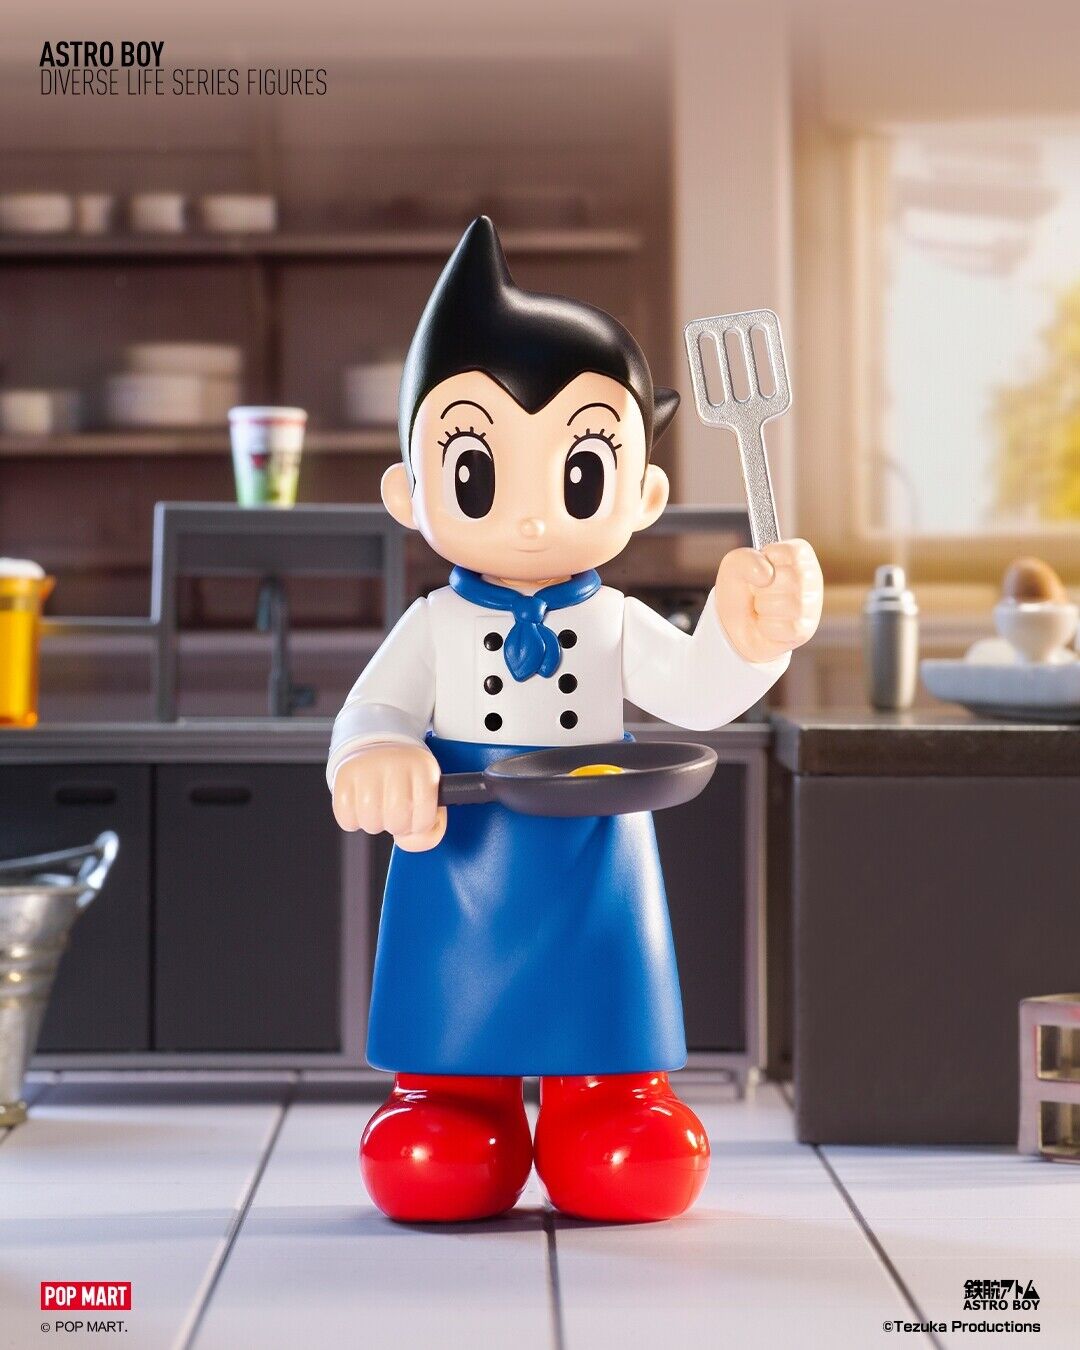 Pop Mart Astro Boy Diverse Life Series Figures Blind Box Collection